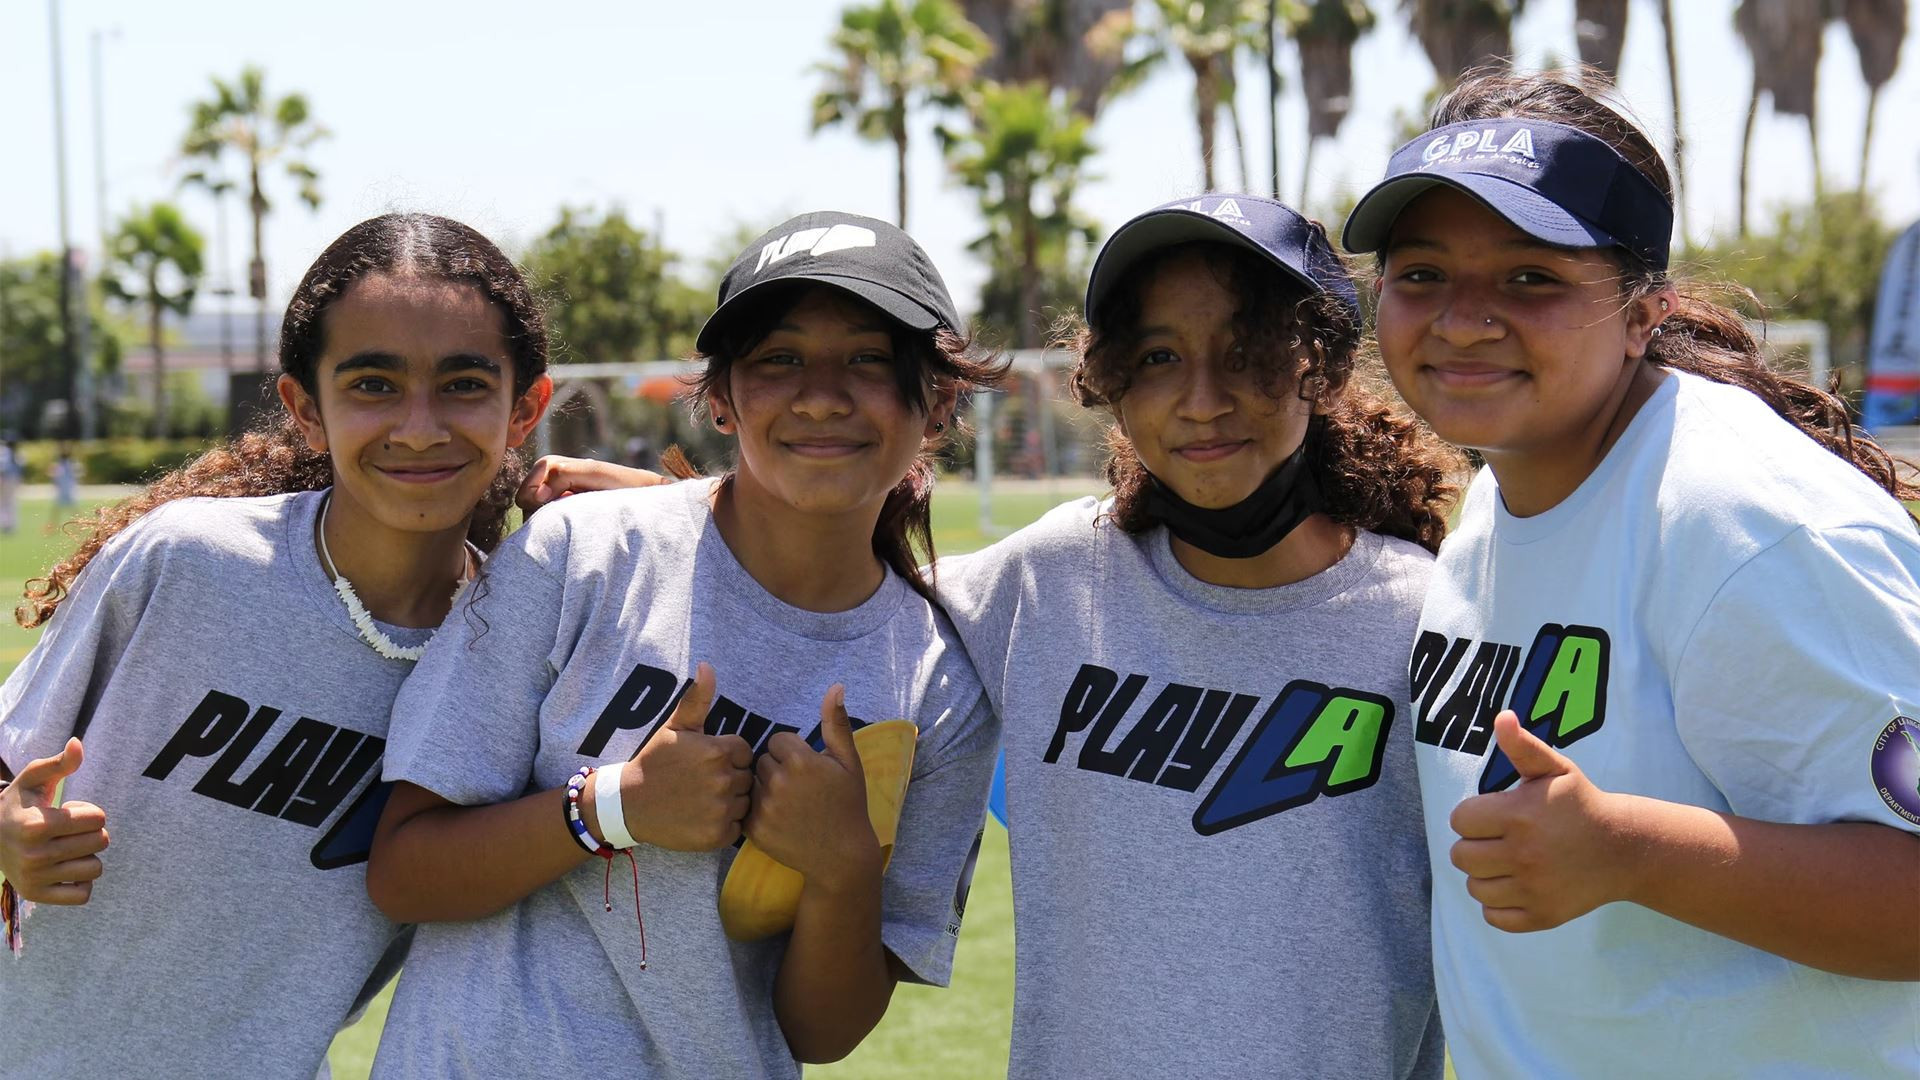 The PlayLA scheme for youth and adaptive sport in Los Angeles has had expanded funding this year ©IOC